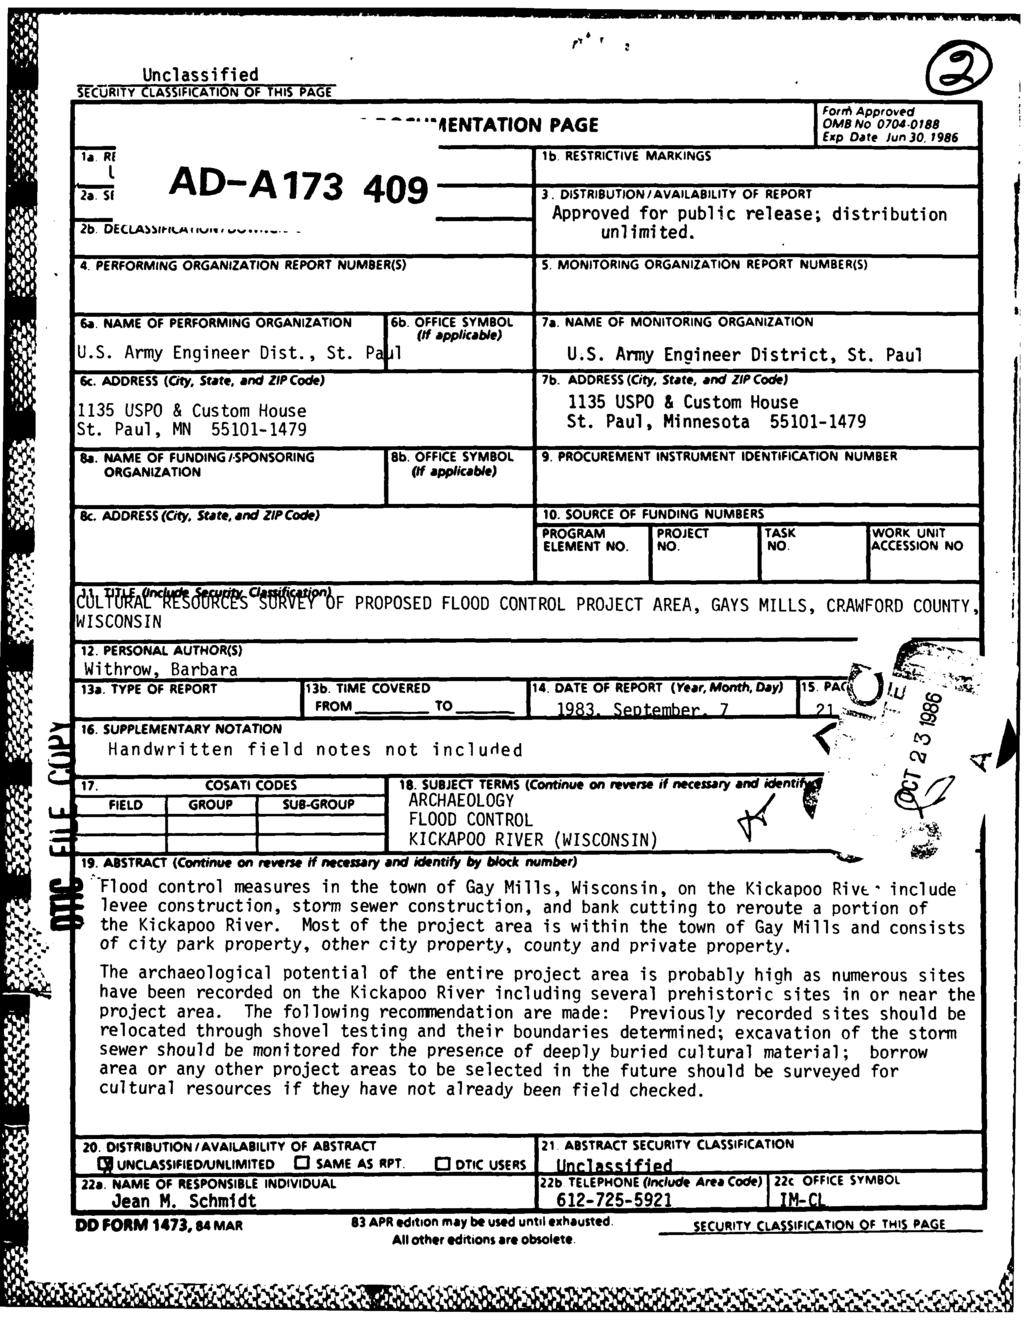 V W Unclassified fe-ctrity CLASSIFICATION OF THIS PAGE IForM' Approv~ed...ENTATION PAGE ombno 0704.0188 _TPAExp Date Jun 30, 1986 la. R lb. RESTRICTIVE MARKINGS 2a. S A 173 3.